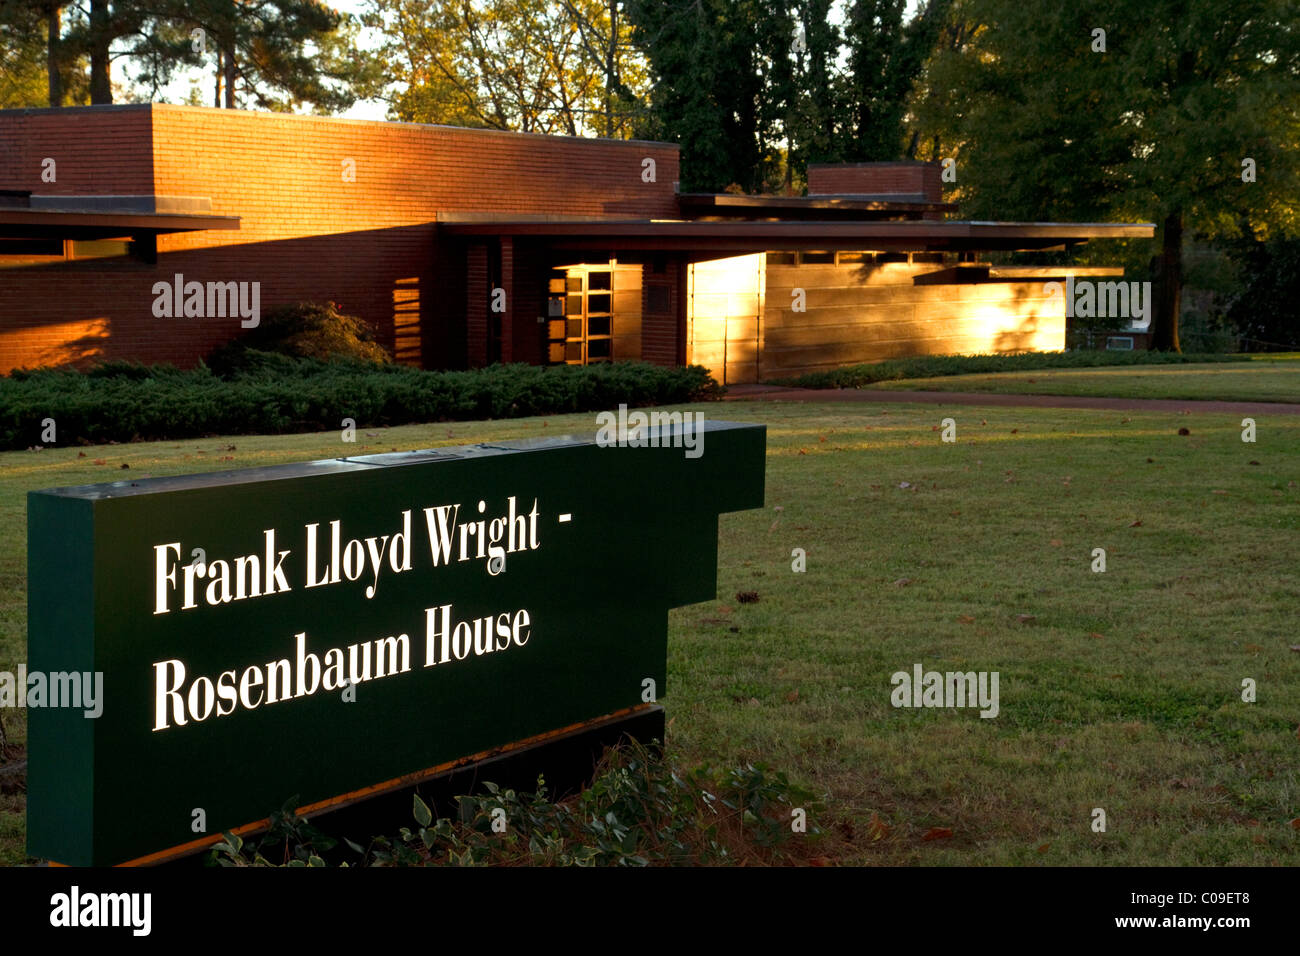 The Rosenbaum House designed by architect Frank Lloyd Wright is a public museum located in Florence, Alabama, USA. Stock Photo